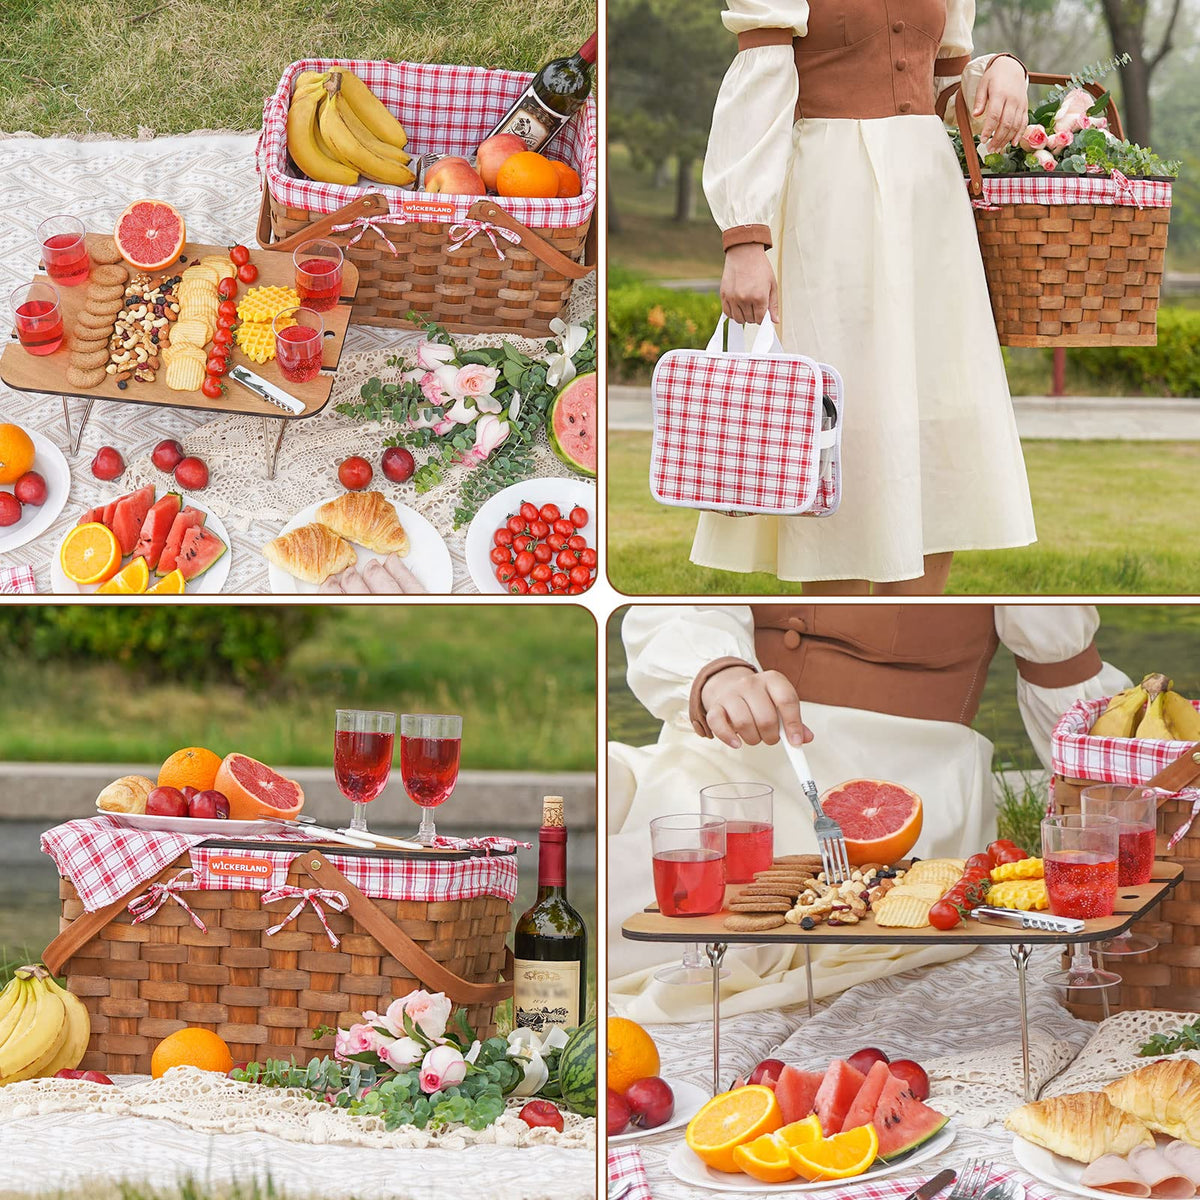 Woodchip Picnic Basket Set for 4 Persons-Walnut Red